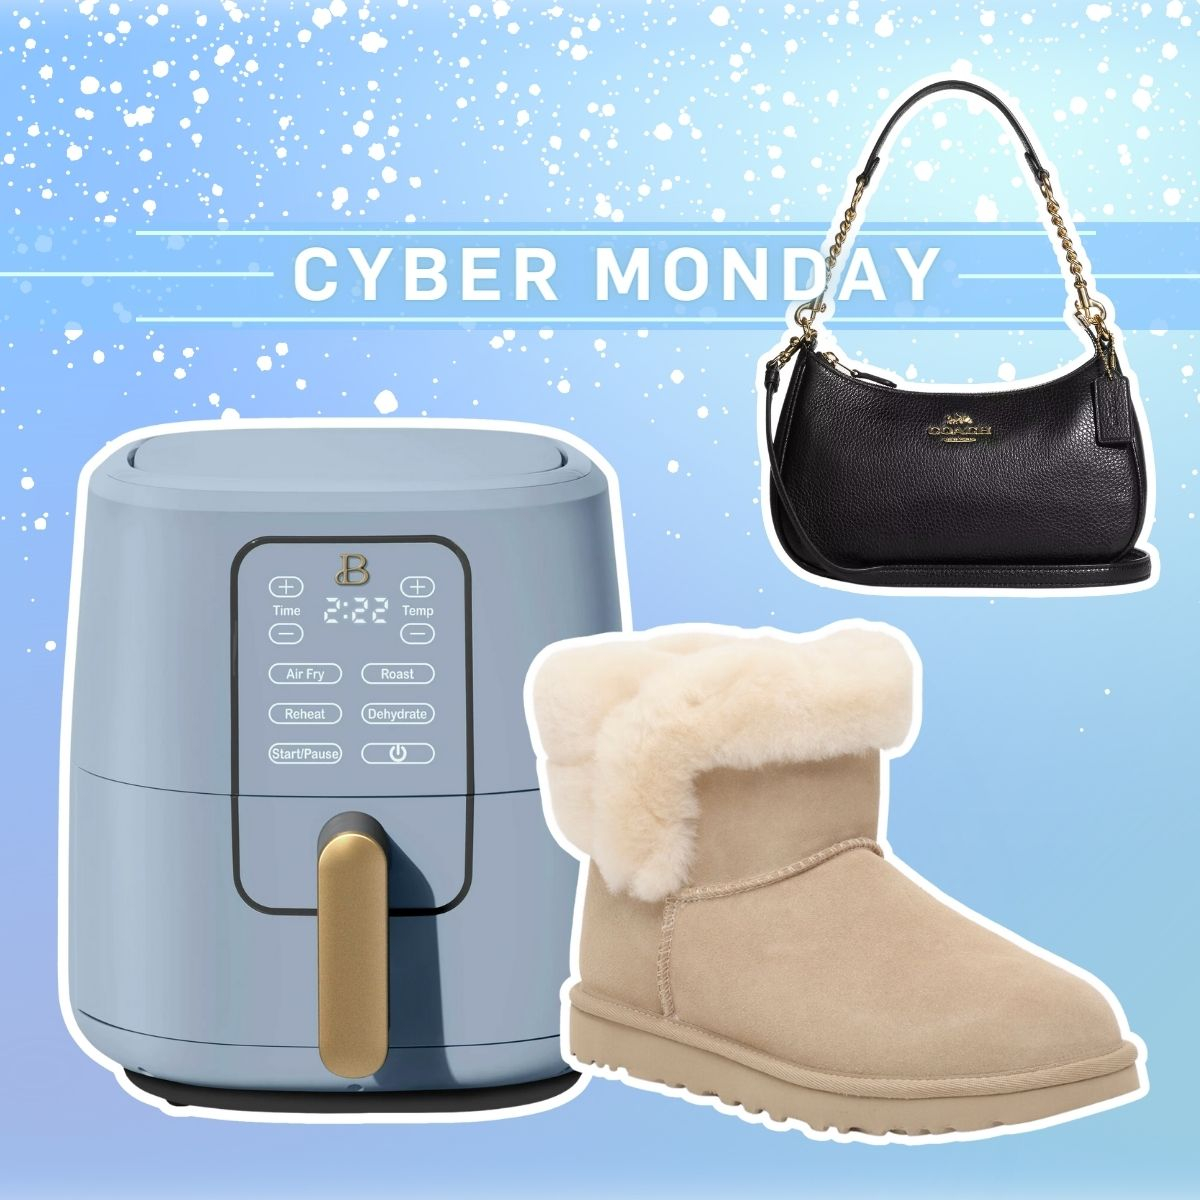 Black Friday / Cyber Monday News, Pictures, and Videos - E! Online